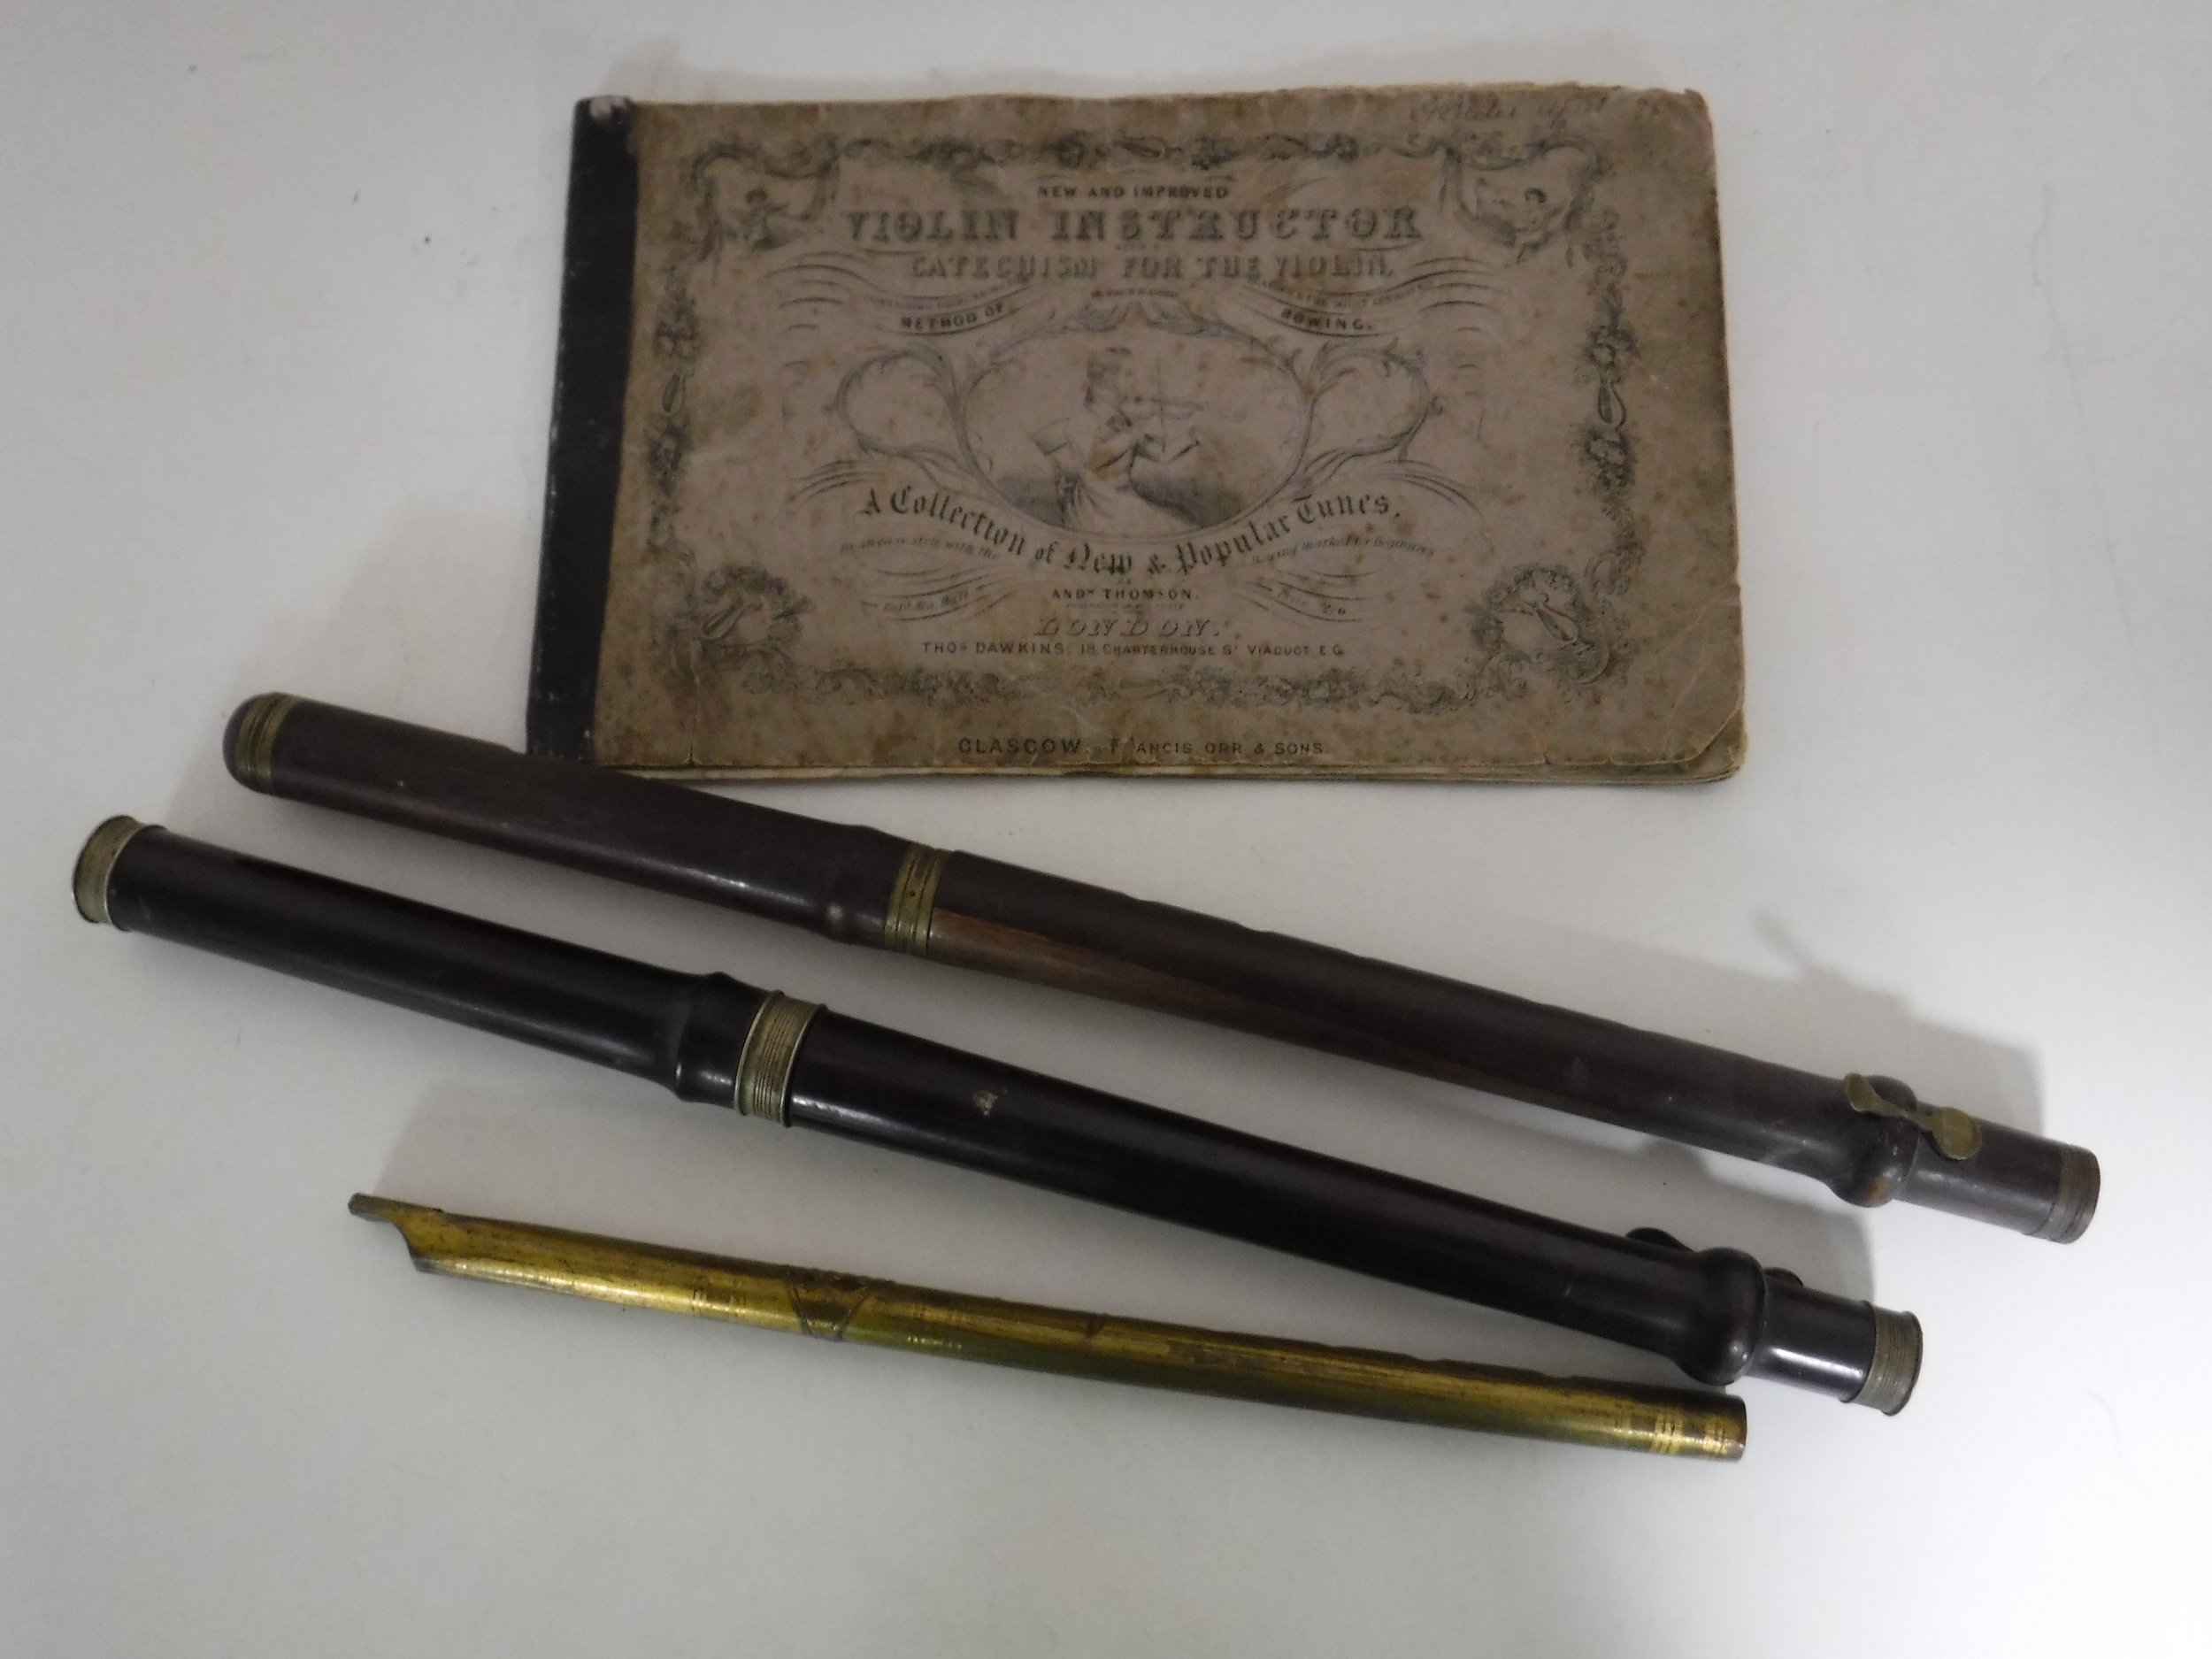 A tin whistle and two part flutes together with a vintage Violin instructor manual